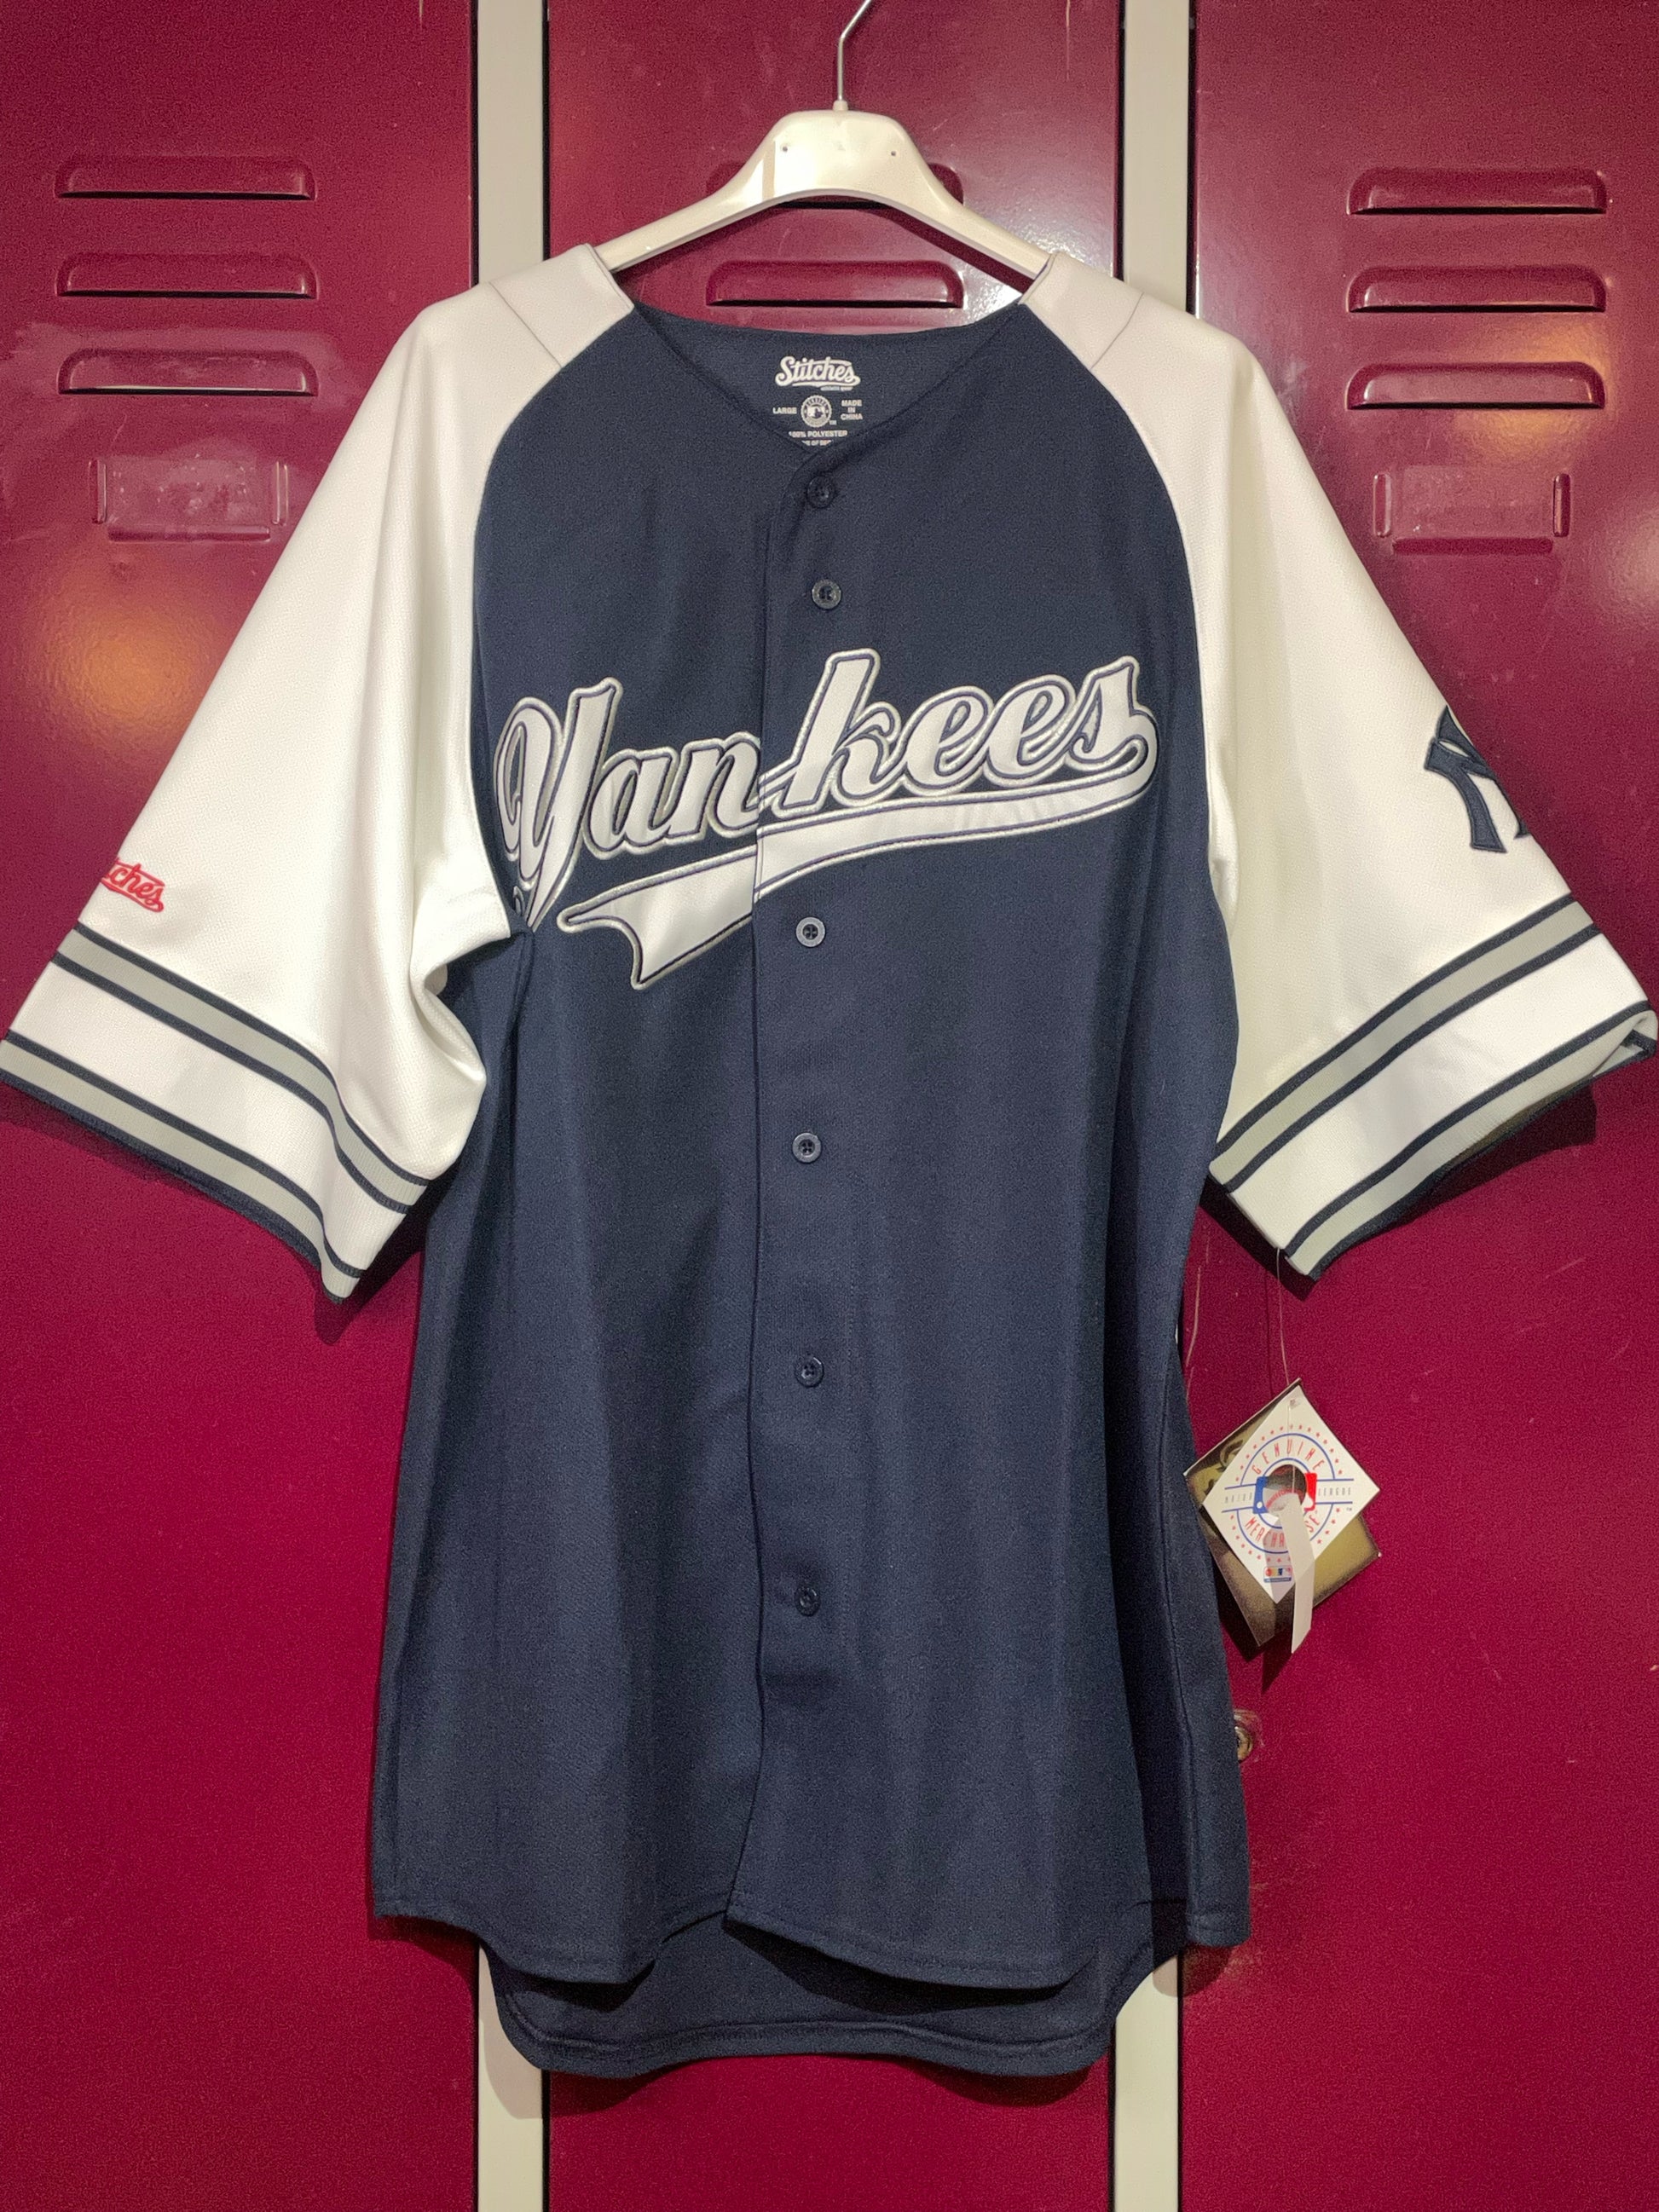 DS STITCHES ATHLETIC NEW YORK YANKEES MLB BASEBALL JERSEY SZ: L – Stay  Alive vintage store